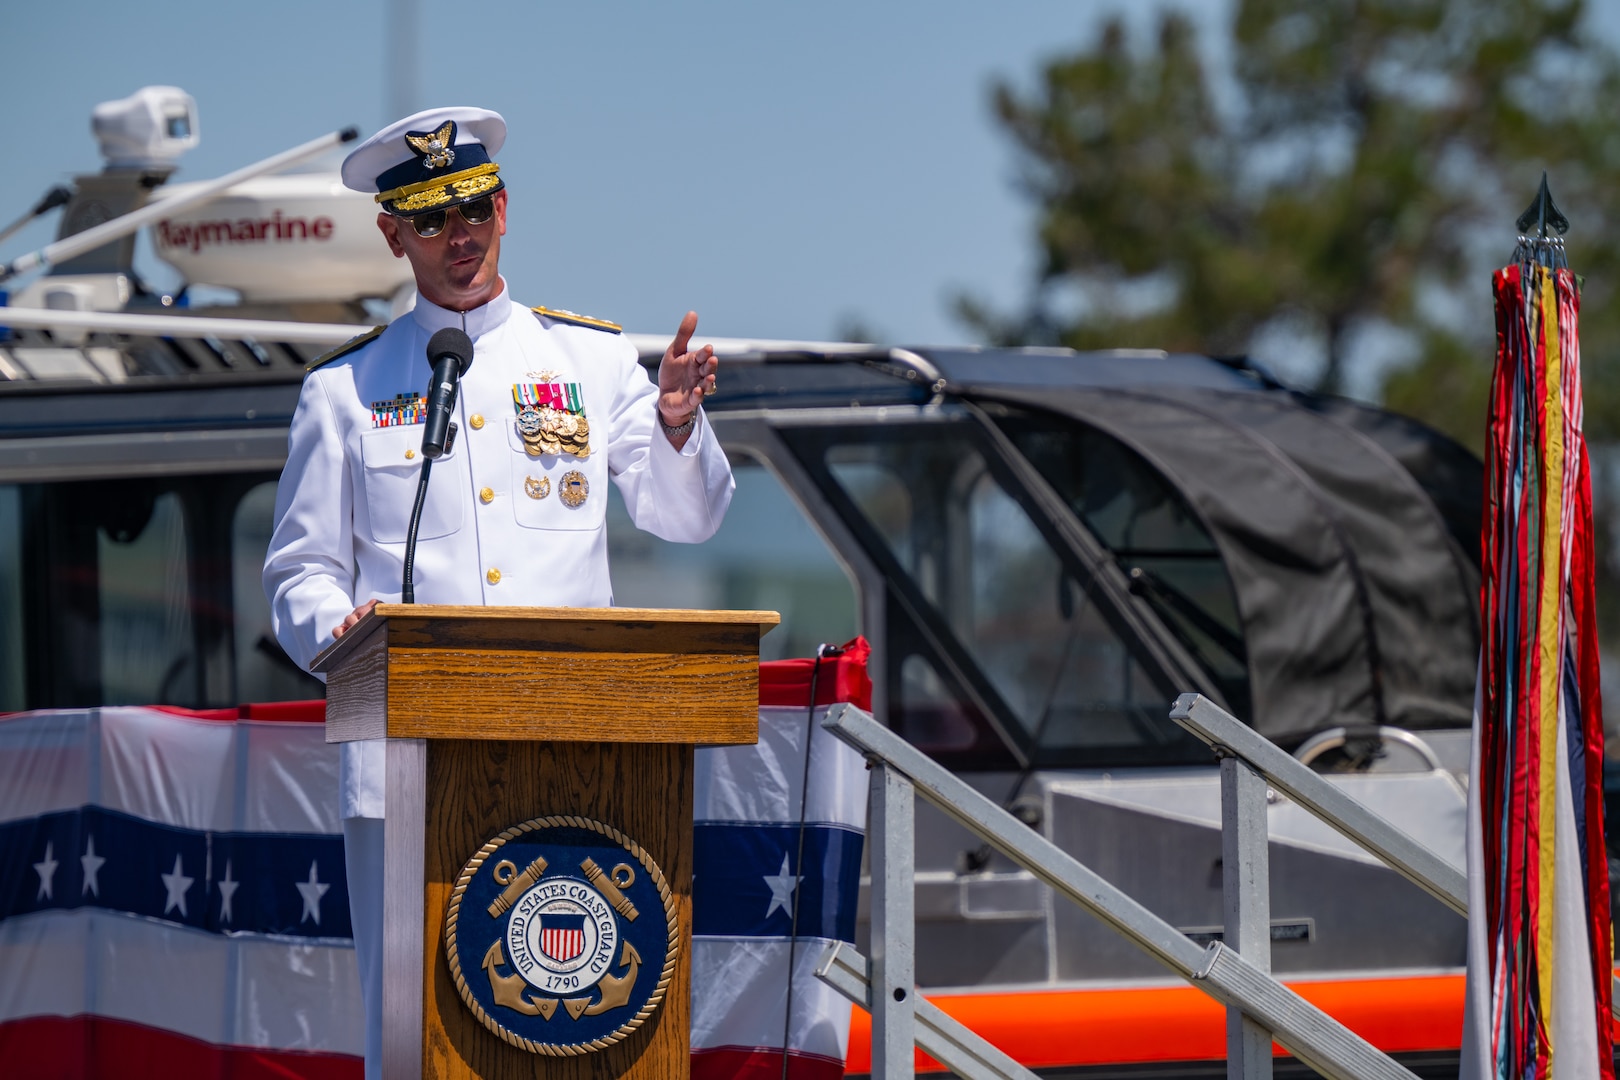 Rear Adm. Joseph Buzzella replaced Rear Adm. Andrew Sugimoto as commander of the Eleventh Coast Guard District during a change-of-command ceremony presided over by Vice Adm. Andrew Tiongson on Coast Guard Island in Alameda